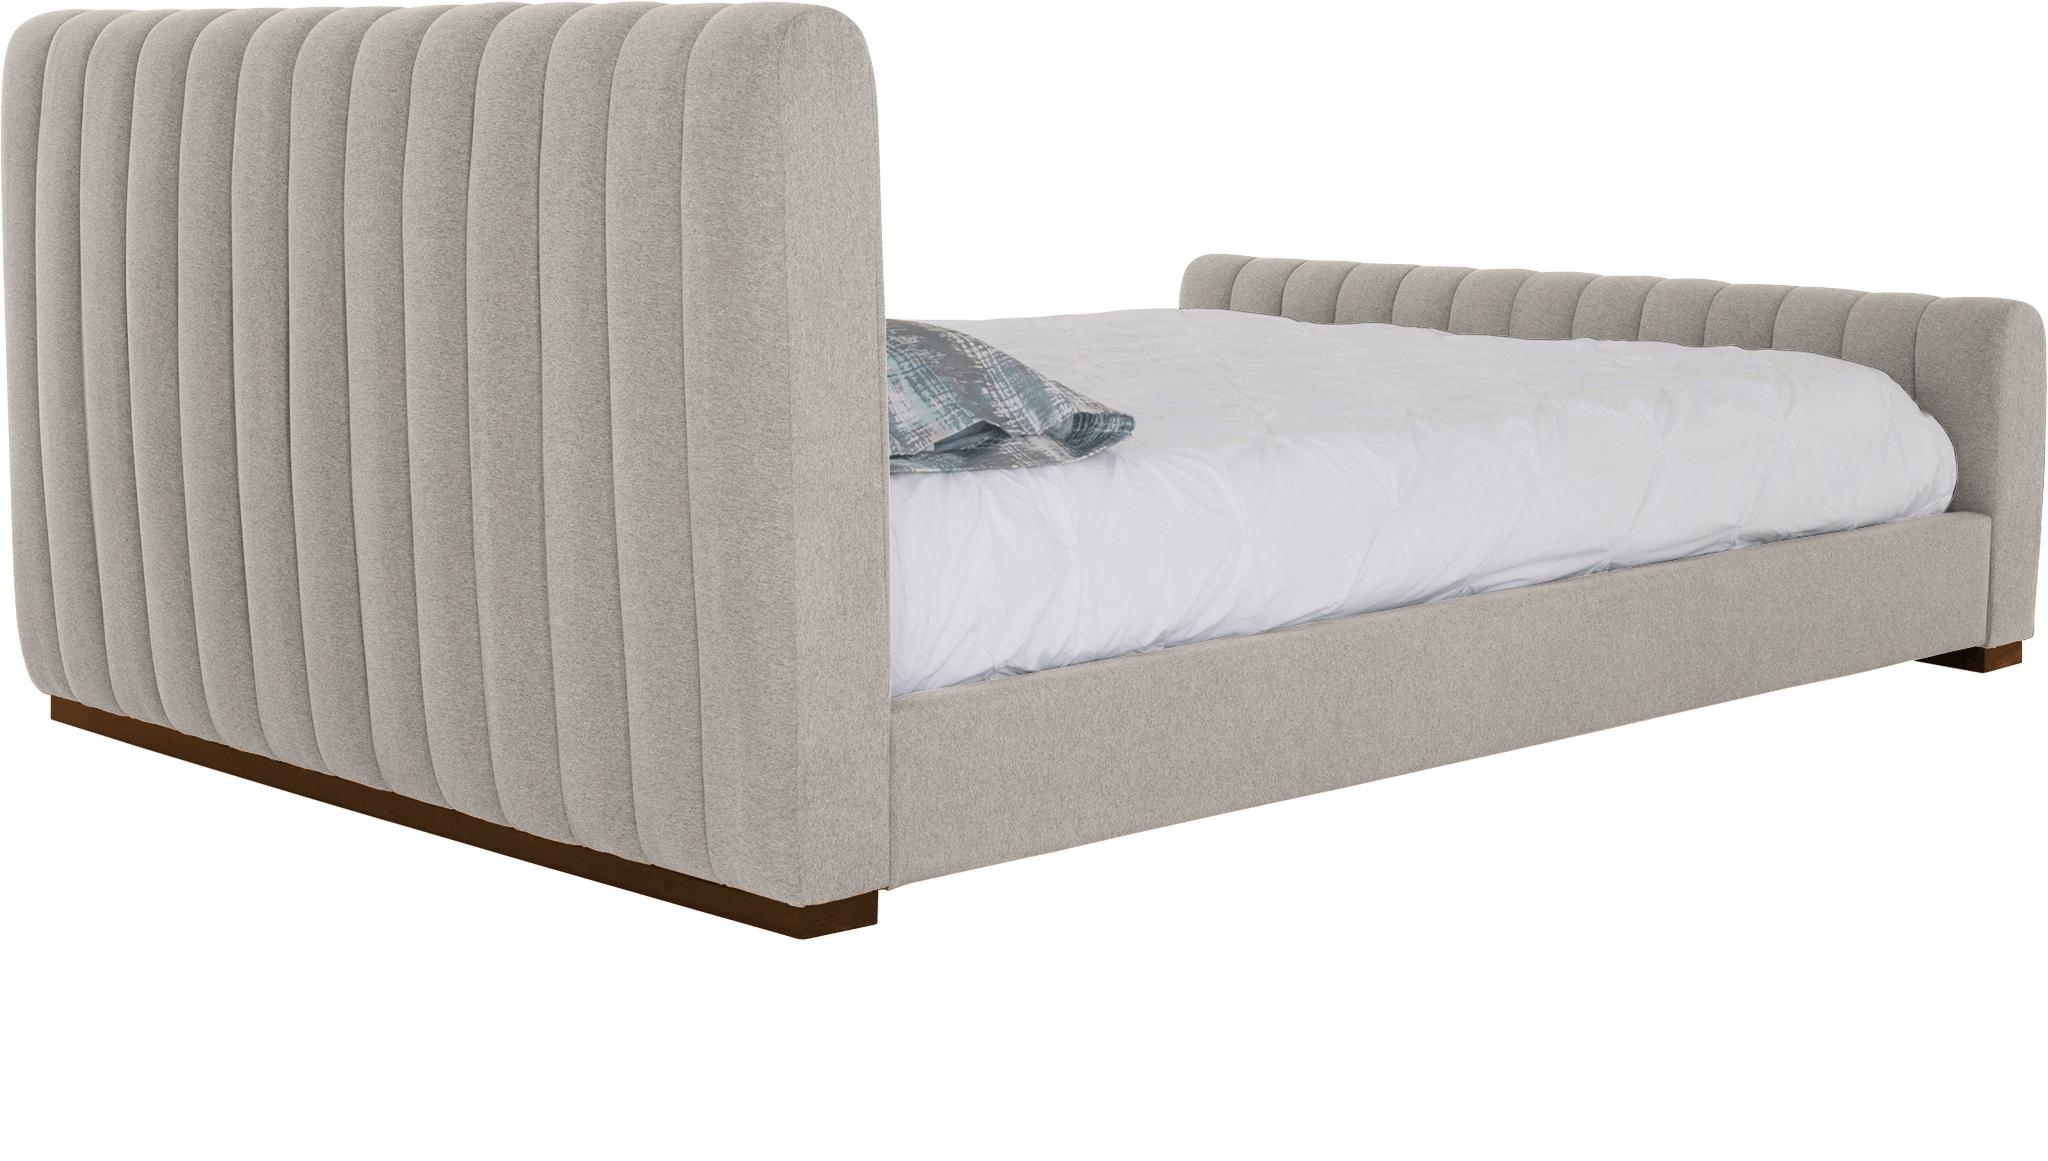 Gray Camille Mid Century Modern Bed - Prime Stone - Mocha - Eastern King - Image 3